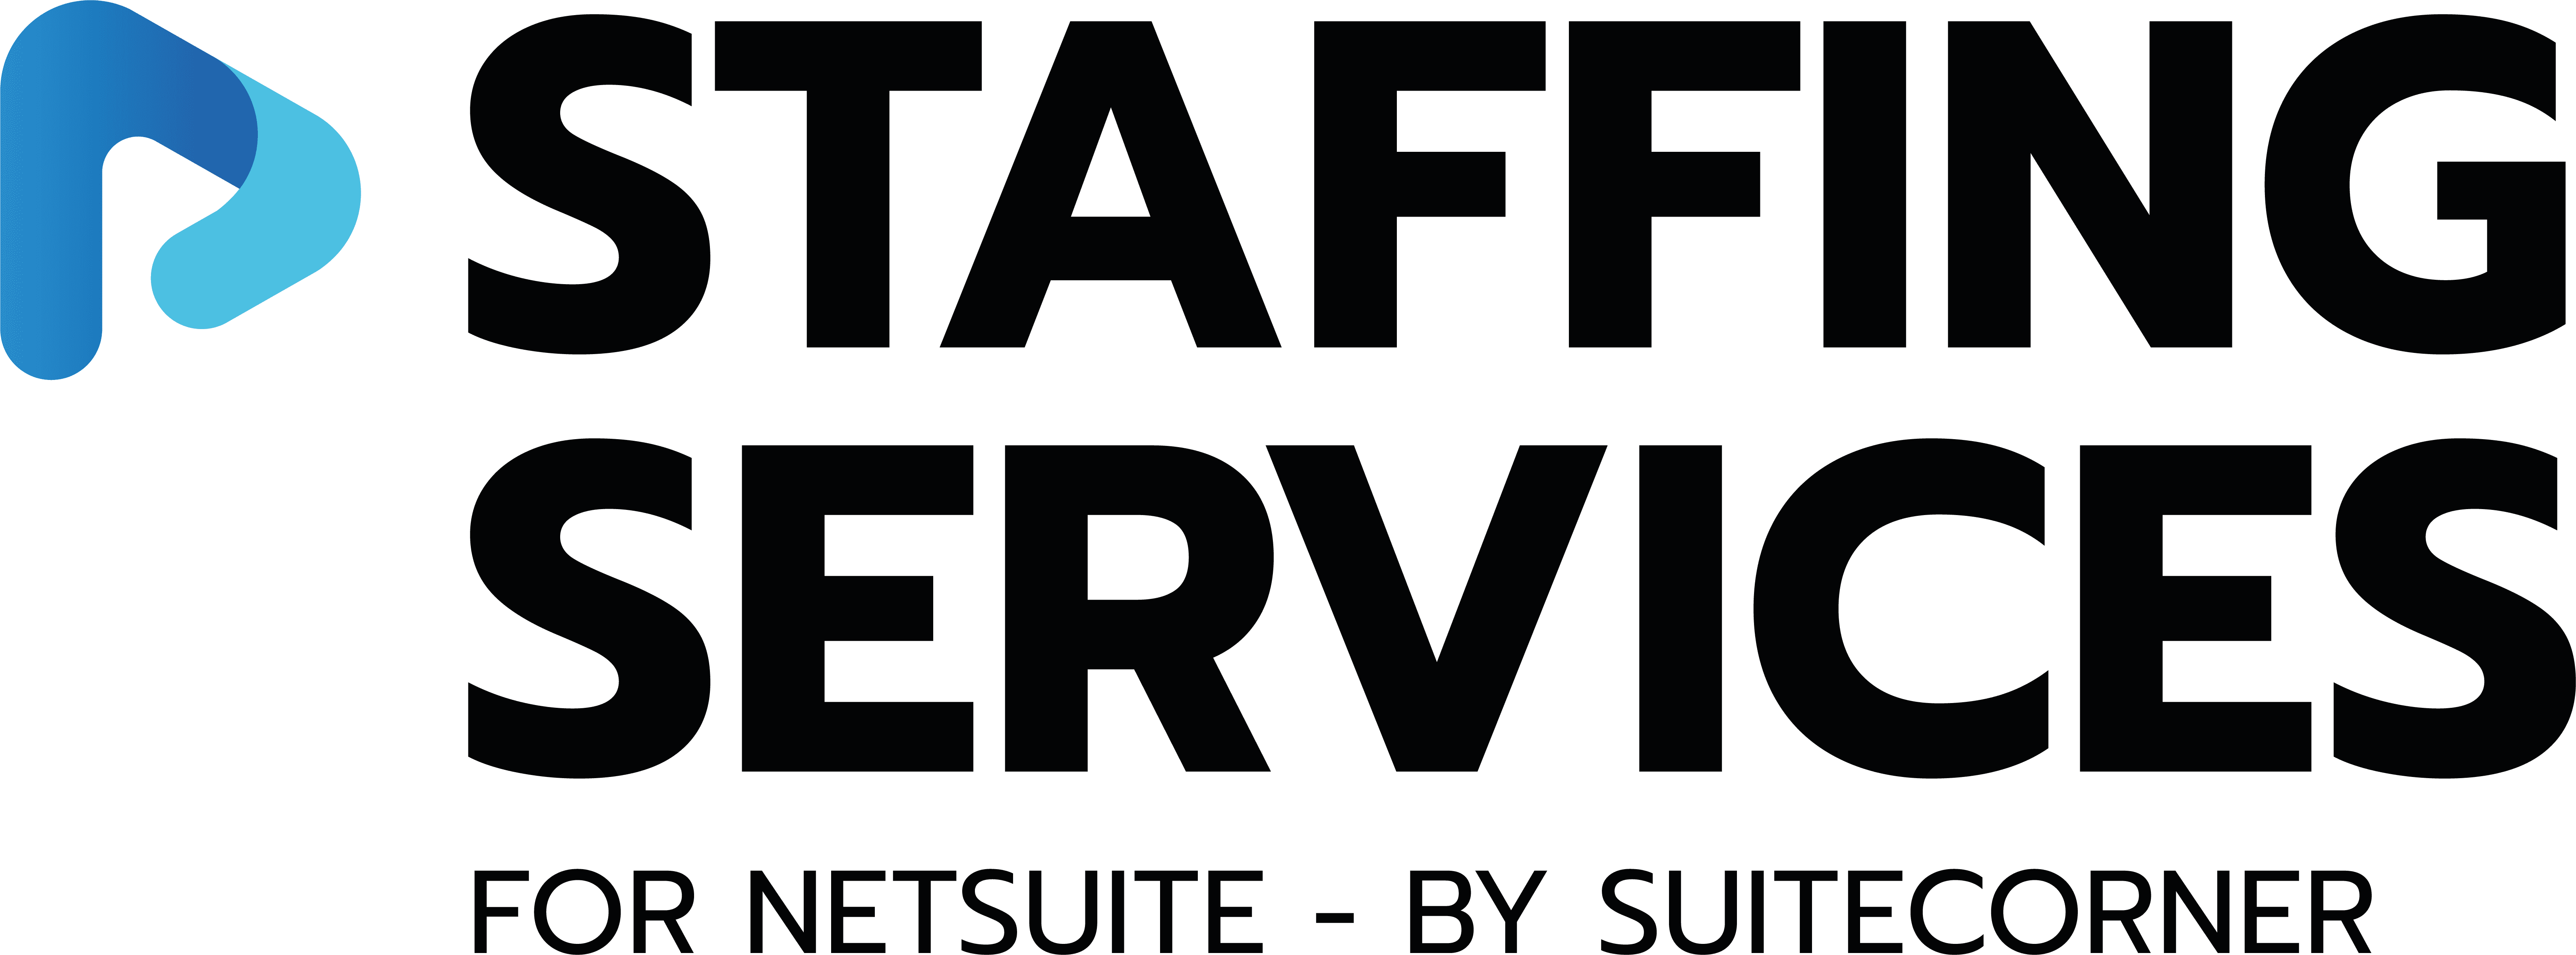 Staffing_services_2